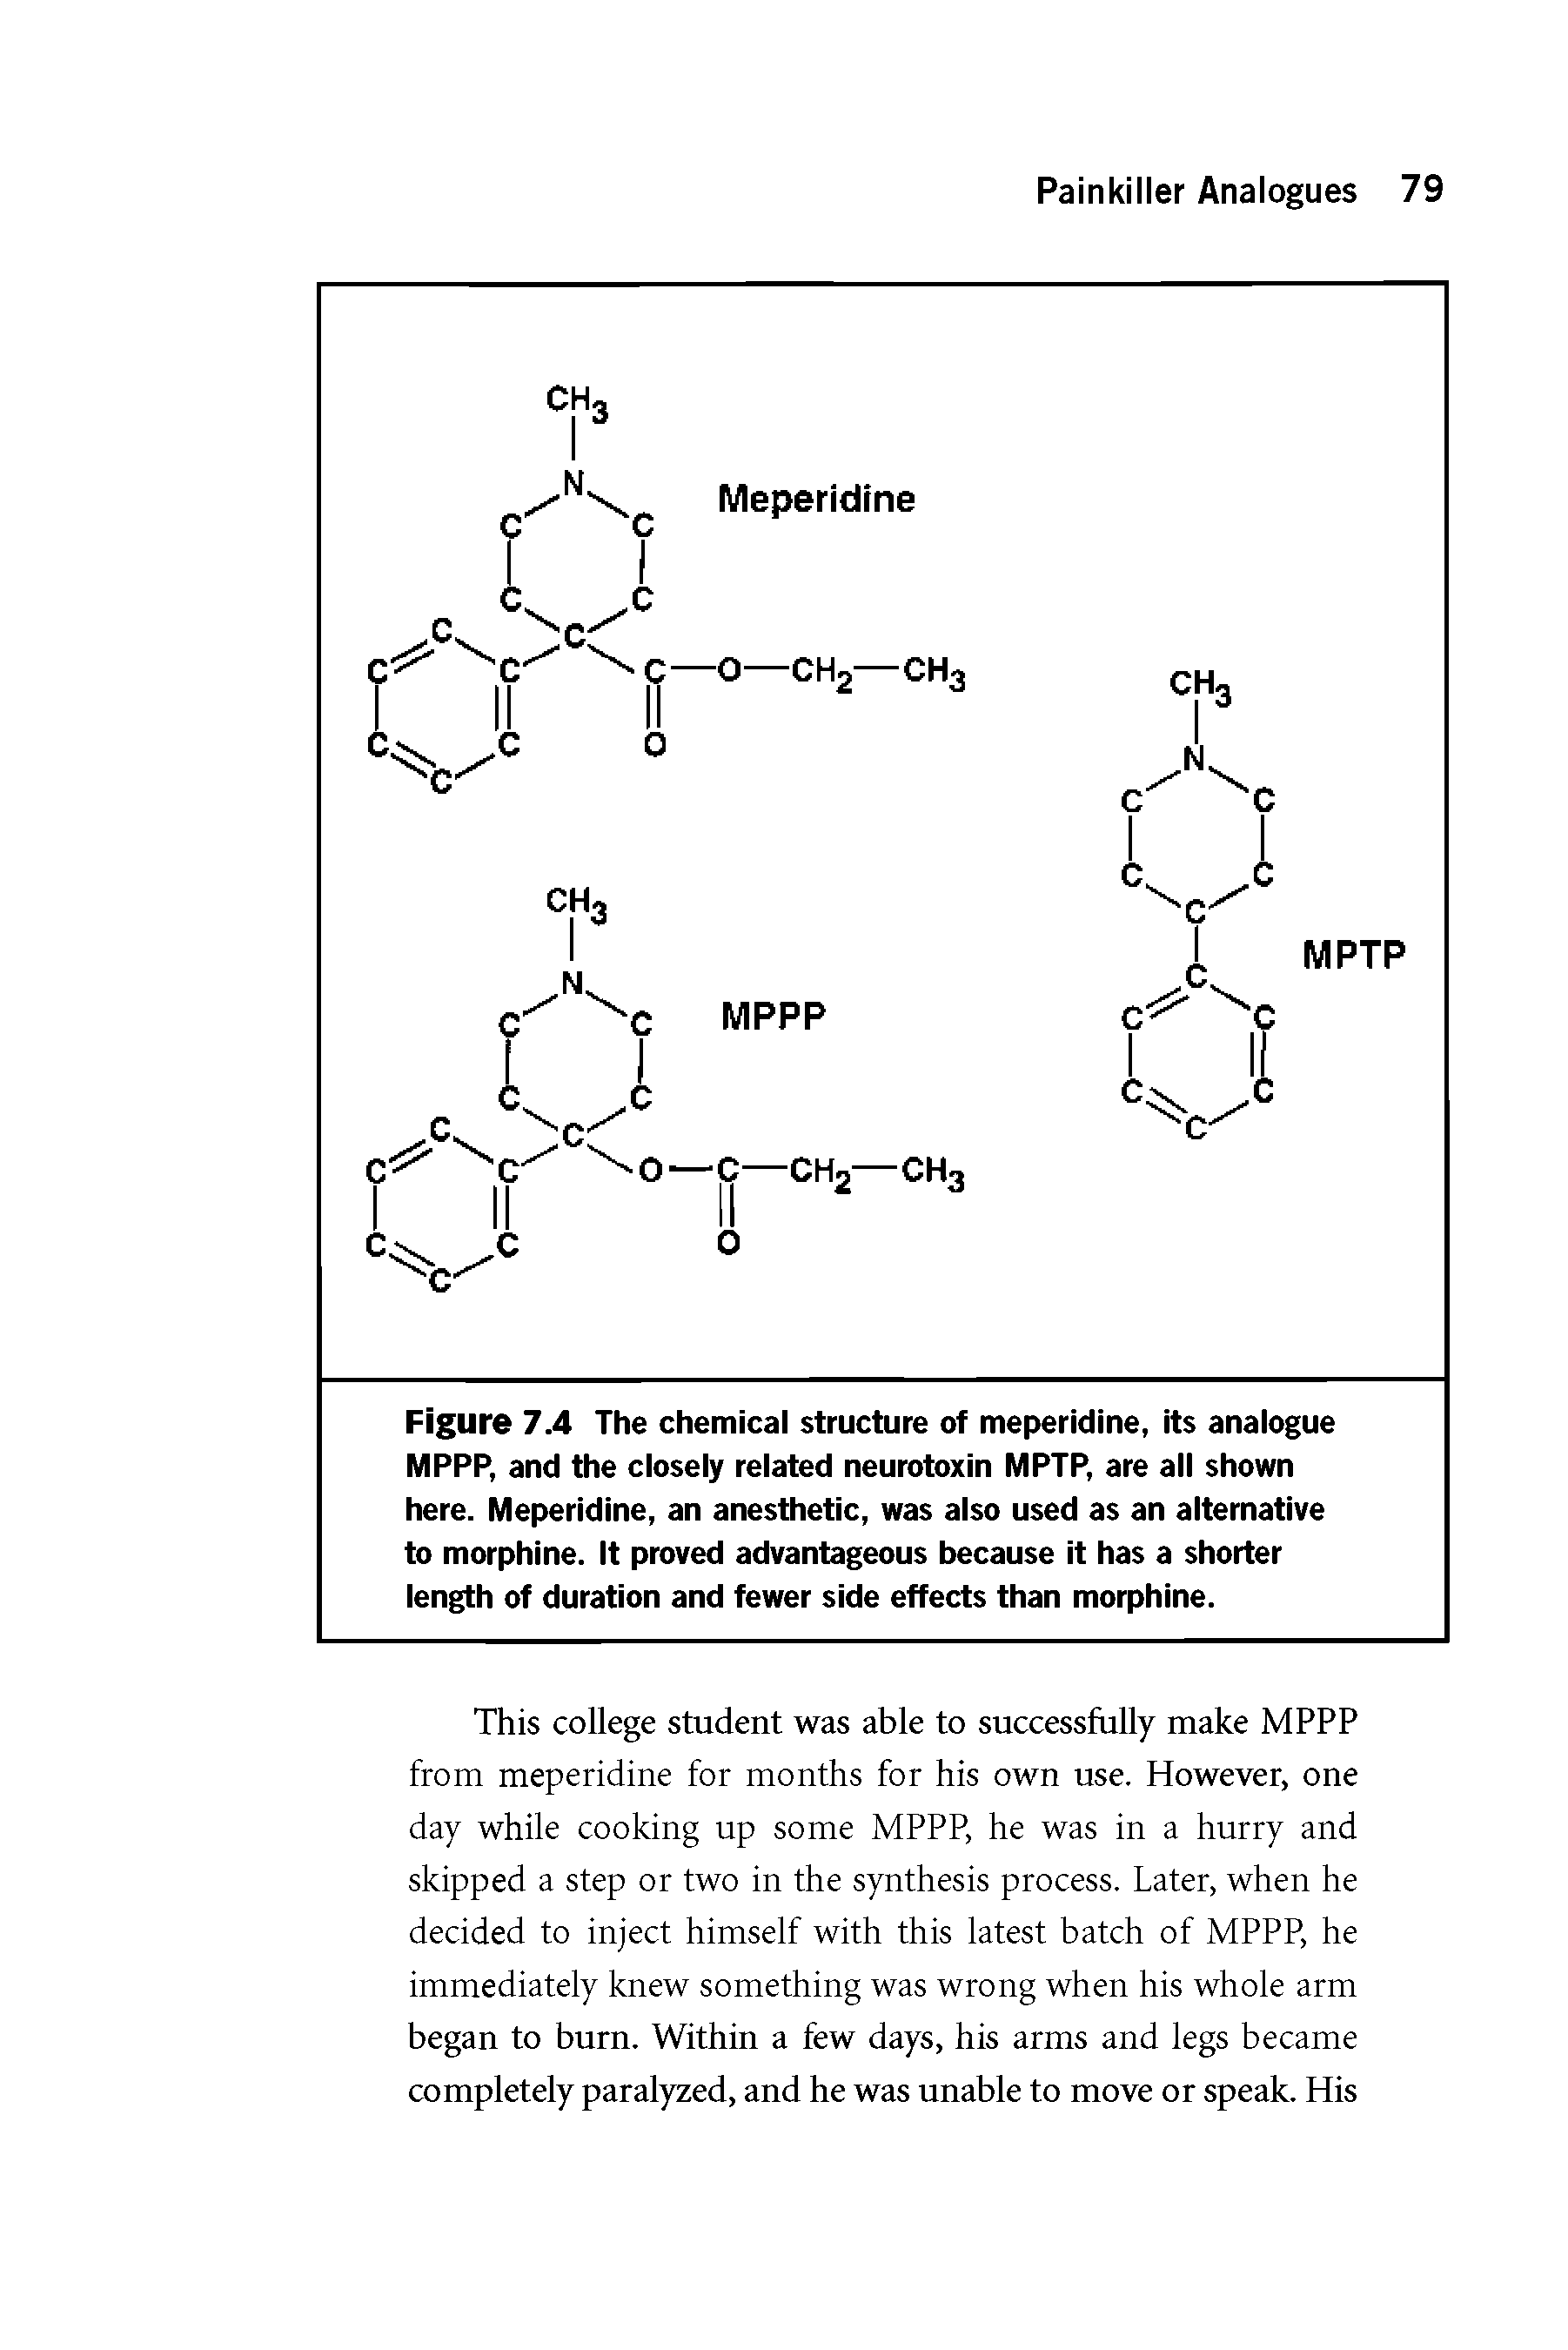 Figure 7.4 The chemical structure of meperidine, its analogue MPPP, and the closely related neurotoxin MPTP, are all shown here. Meperidine, an anesthetic, was also used as an alternative to morphine. It proved advantageous because it has a shorter length of duration and fewer side effects than morphine.